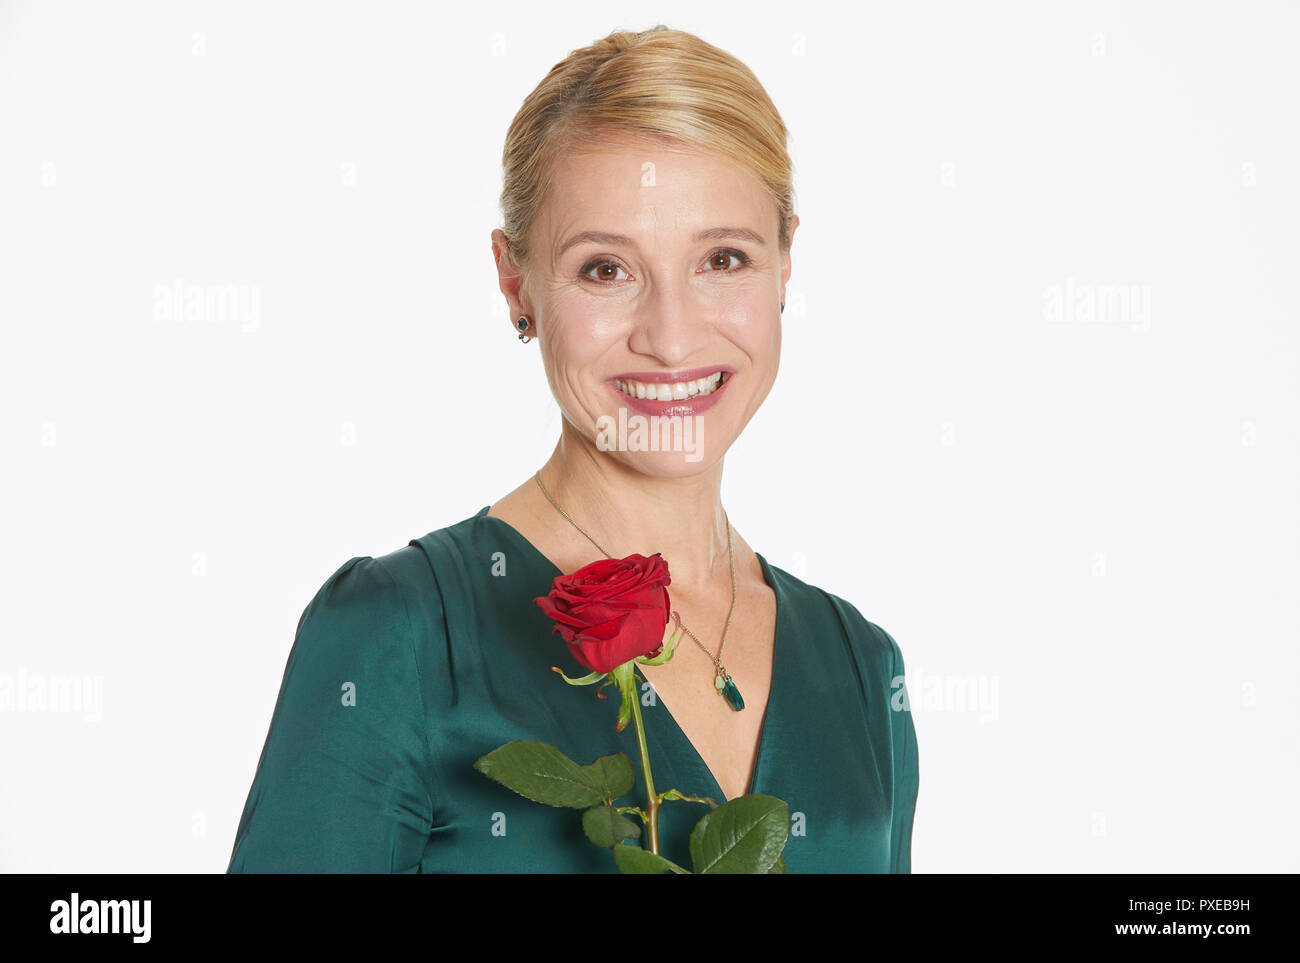 Hamburg, Germany. 22nd Oct, 2018. The actress Solveig August in the role of  Margret, taken at a photo shoot for the new season of the ARD telenovela  "Rote Rosen". Credit: Georg Wendt/dpa/Alamy